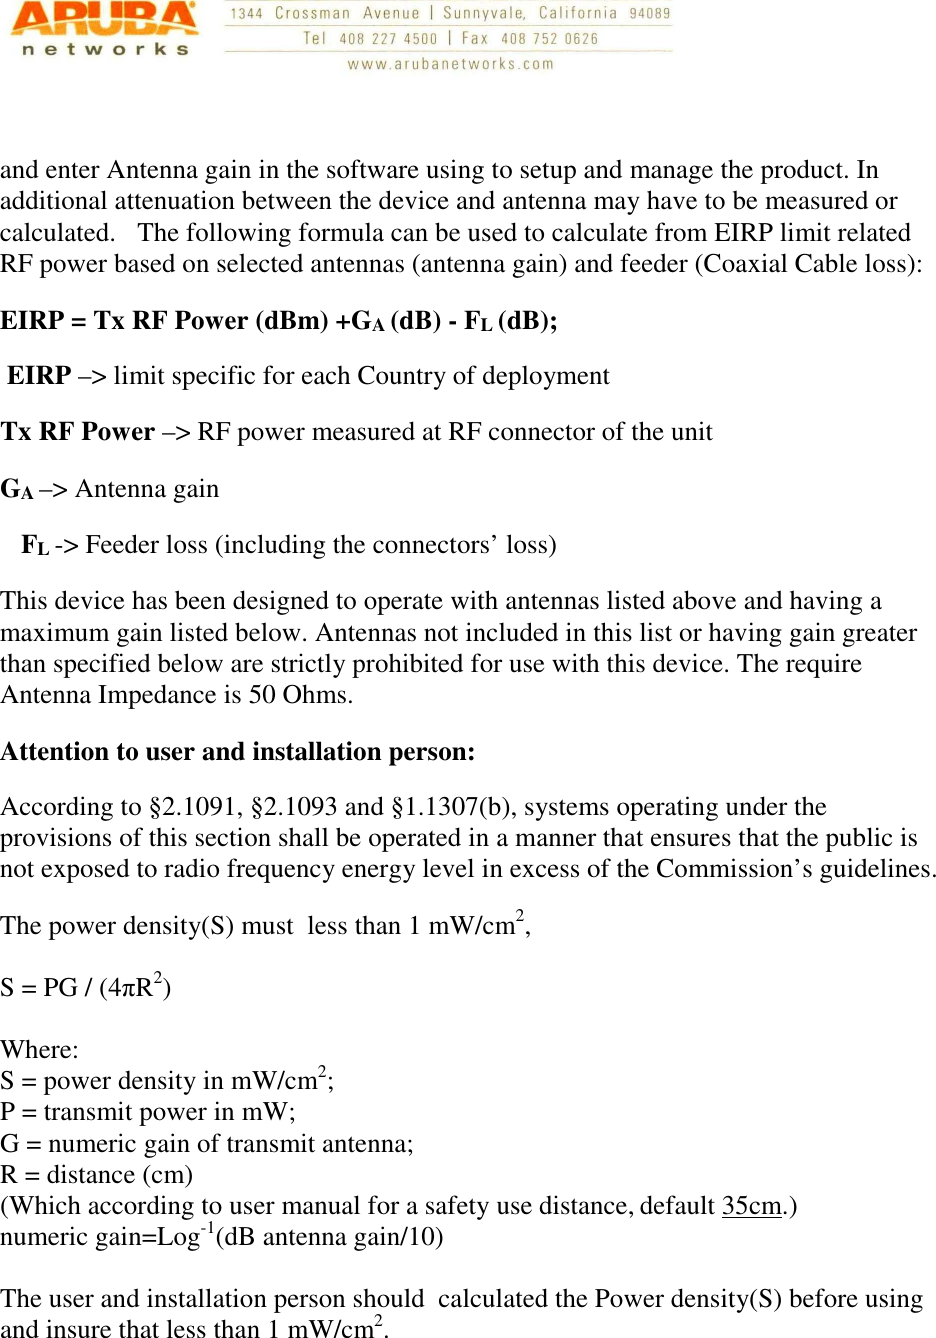    and enter Antenna gain in the software using to setup and manage the product. In additional attenuation between the device and antenna may have to be measured or calculated. The following formula can be used to calculate from EIRP limit related RF power based on selected antennas (antenna gain) and feeder (Coaxial Cable loss): EIRP = Tx RF Power (dBm) +GA (dB) - FL (dB);  EIRP –&gt; limit specific for each Country of deployment Tx RF Power –&gt; RF power measured at RF connector of the unit  GA –&gt; Antenna gain FL -&gt; Feeder loss (including the connectors’ loss) This device has been designed to operate with antennas listed above and having a maximum gain listed below. Antennas not included in this list or having gain greater than specified below are strictly prohibited for use with this device. The require Antenna Impedance is 50 Ohms. Attention to user and installation person: According to §2.1091, §2.1093 and §1.1307(b), systems operating under the provisions of this section shall be operated in a manner that ensures that the public is not exposed to radio frequency energy level in excess of the Commission’s guidelines.     The power density(S) must  less than 1 mW/cm2,          S = PG / (4πR2)  Where: S = power density in mW/cm2; P = transmit power in mW; G = numeric gain of transmit antenna; R = distance (cm) (Which according to user manual for a safety use distance, default 35cm.) numeric gain=Log-1(dB antenna gain/10)   The user and installation person should  calculated the Power density(S) before using and insure that less than 1 mW/cm2.     